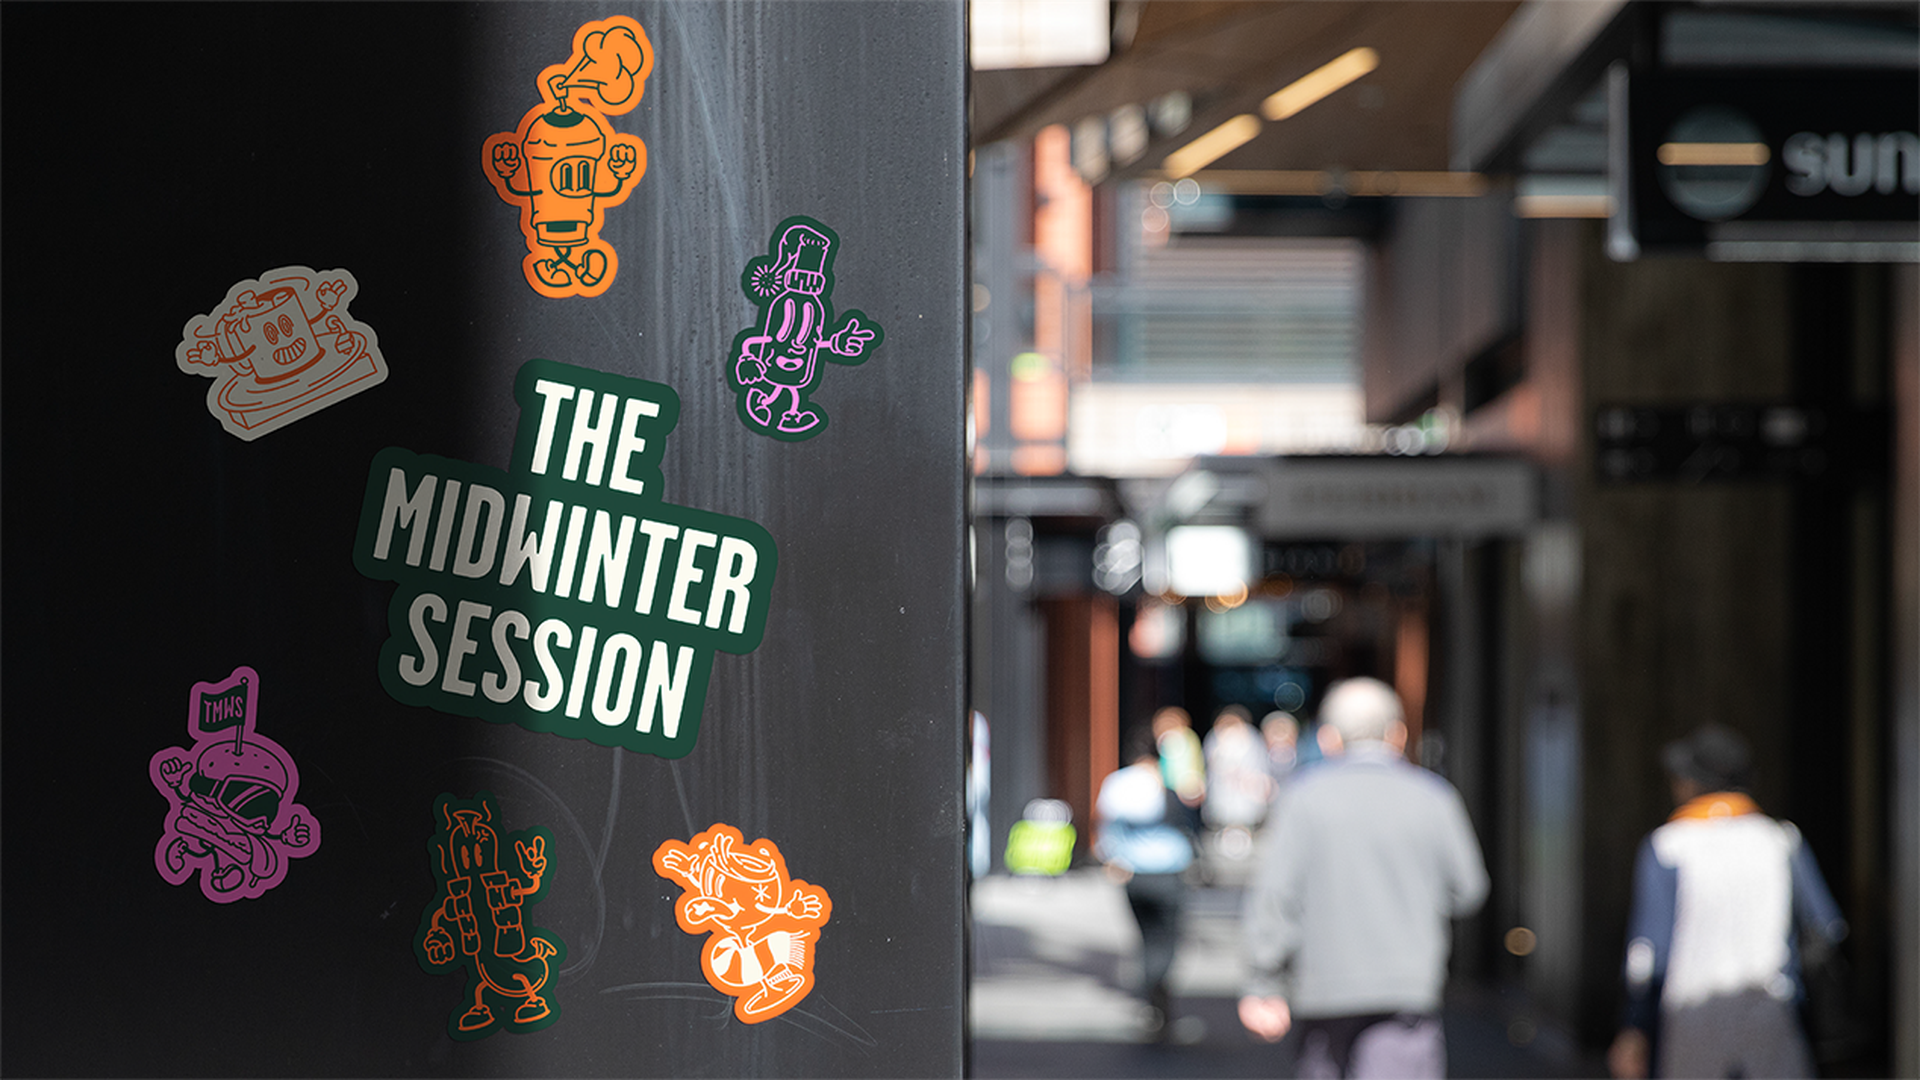 The Midwinter Session branded stickers on the streets of Christchurch